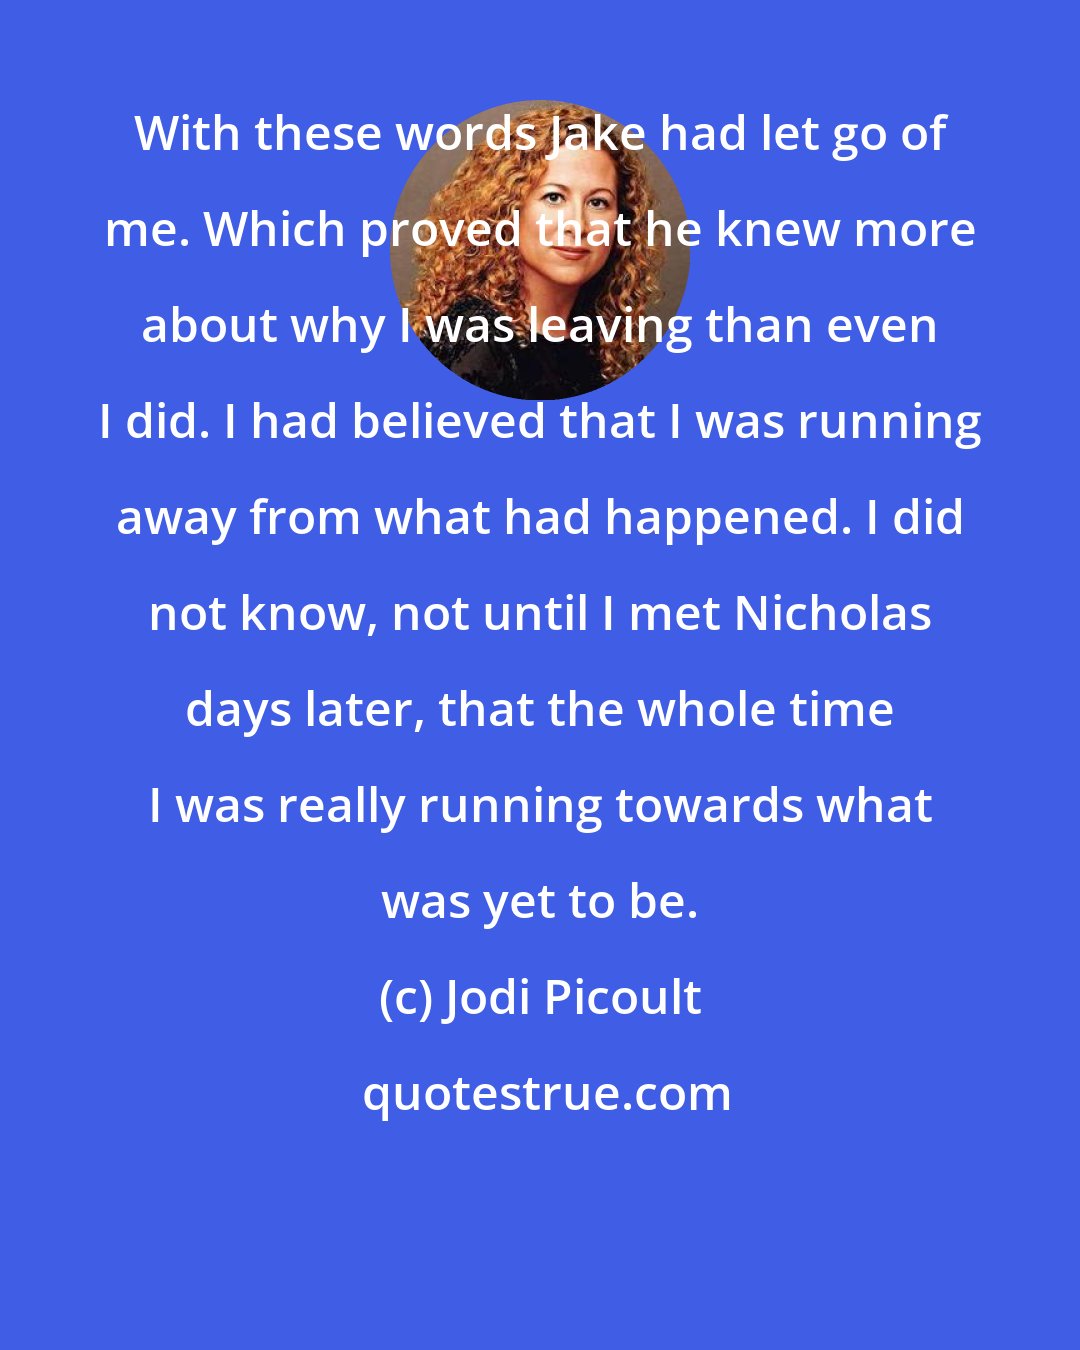 Jodi Picoult: With these words Jake had let go of me. Which proved that he knew more about why I was leaving than even I did. I had believed that I was running away from what had happened. I did not know, not until I met Nicholas days later, that the whole time I was really running towards what was yet to be.